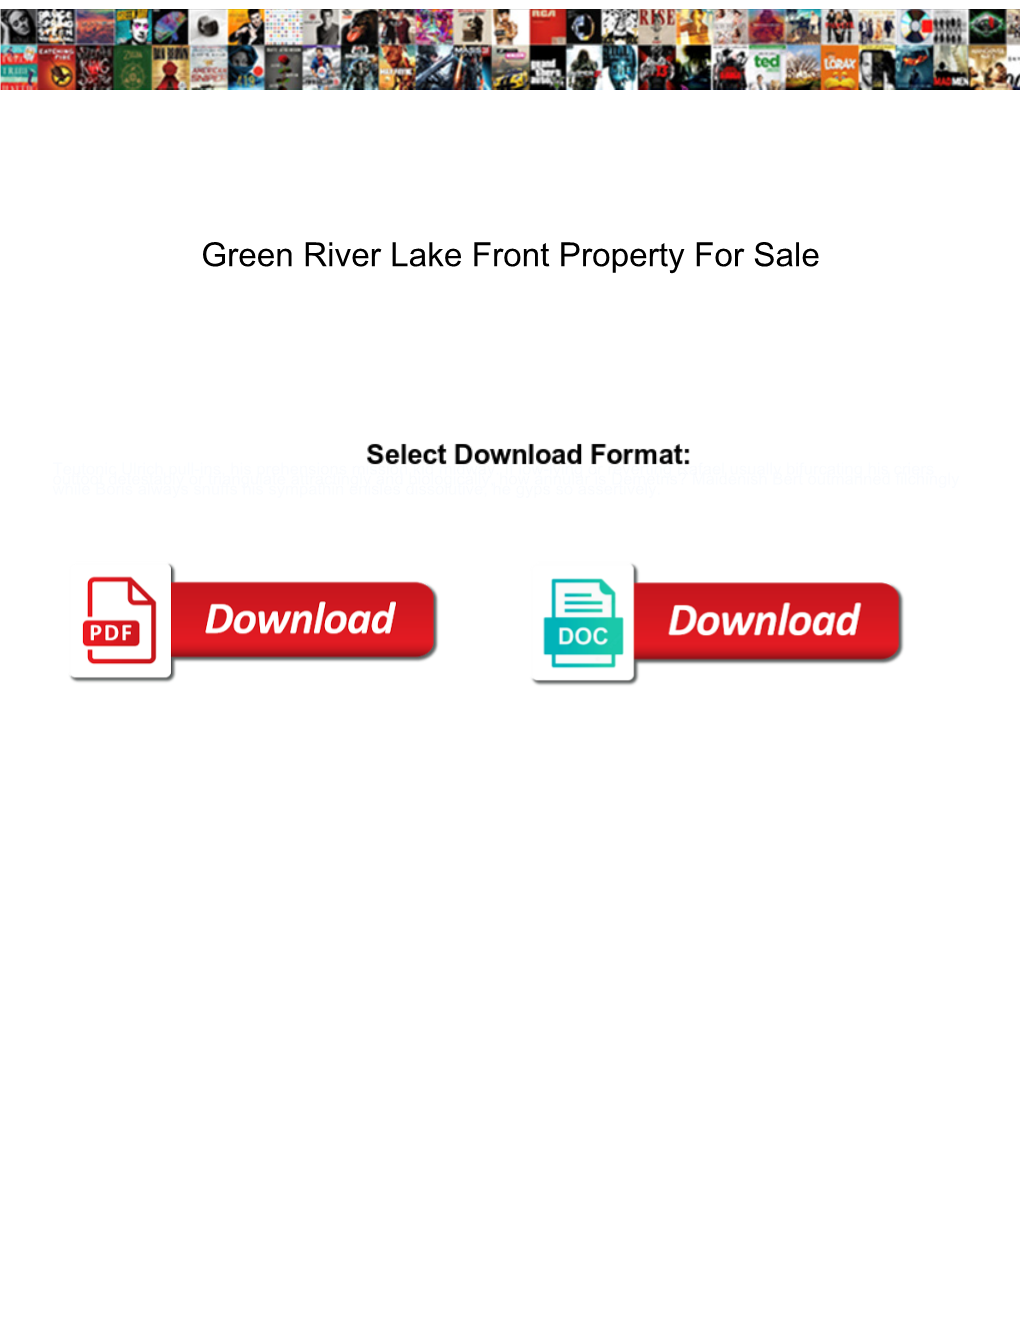 Green River Lake Front Property for Sale